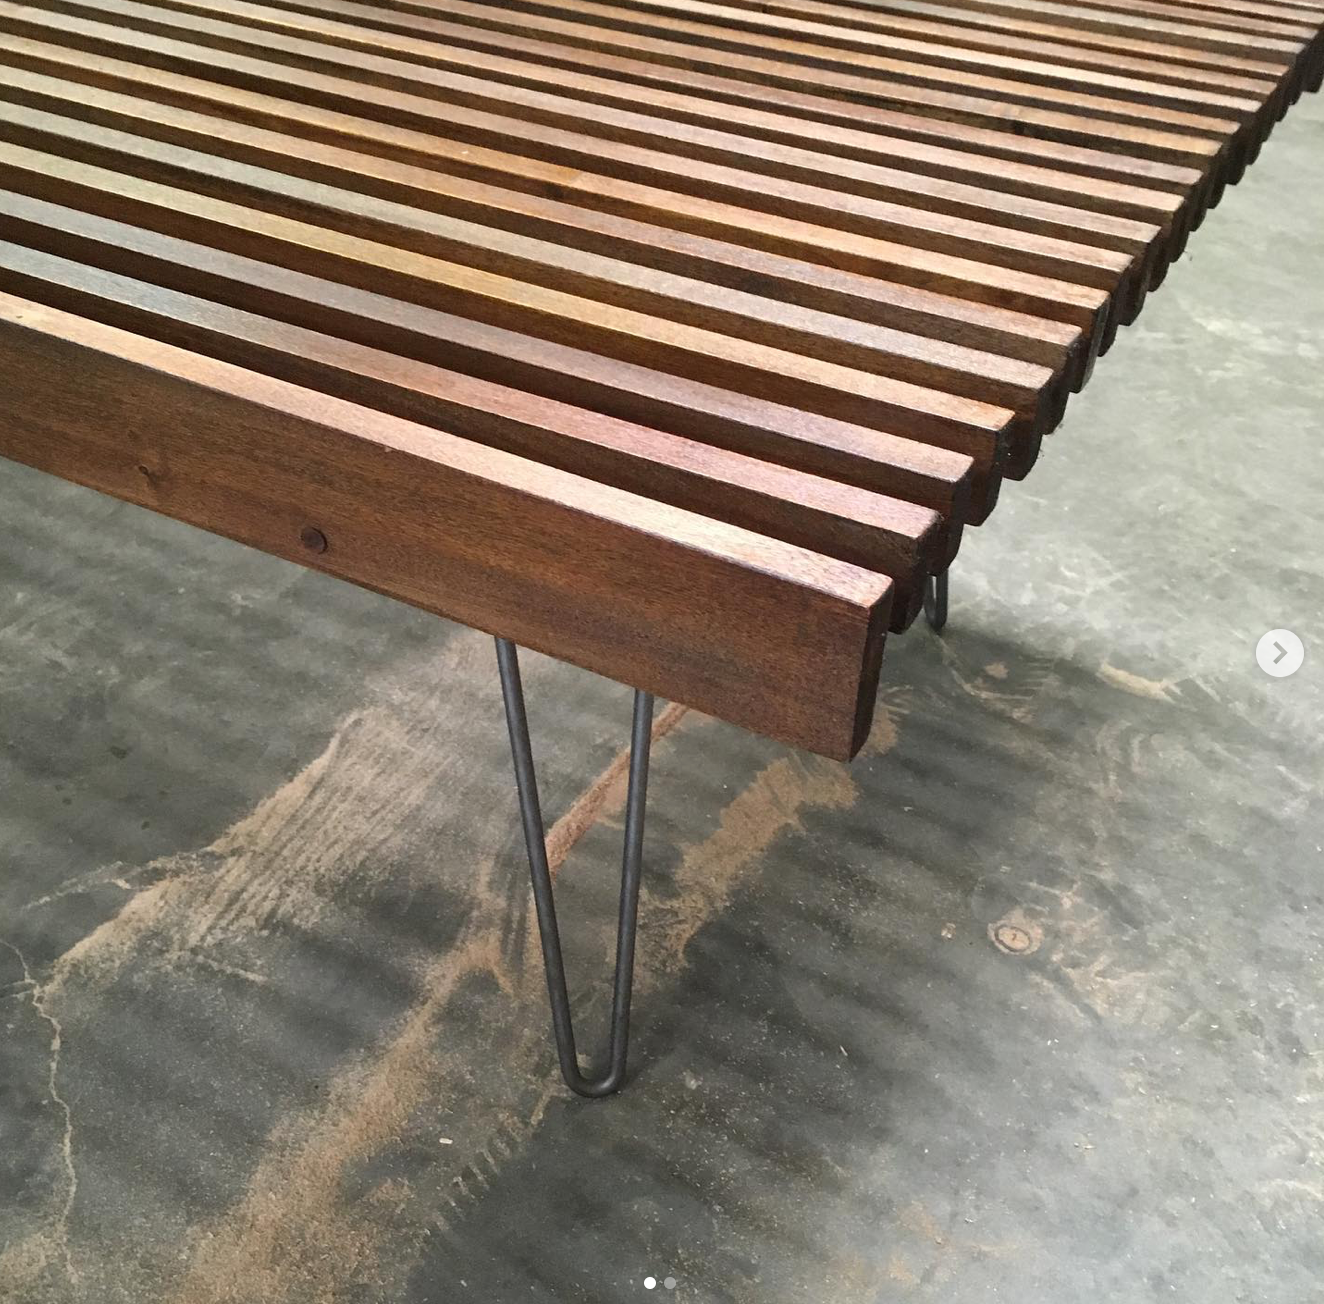 Slat Bench with Steel Hairpin Legs- Made to Order